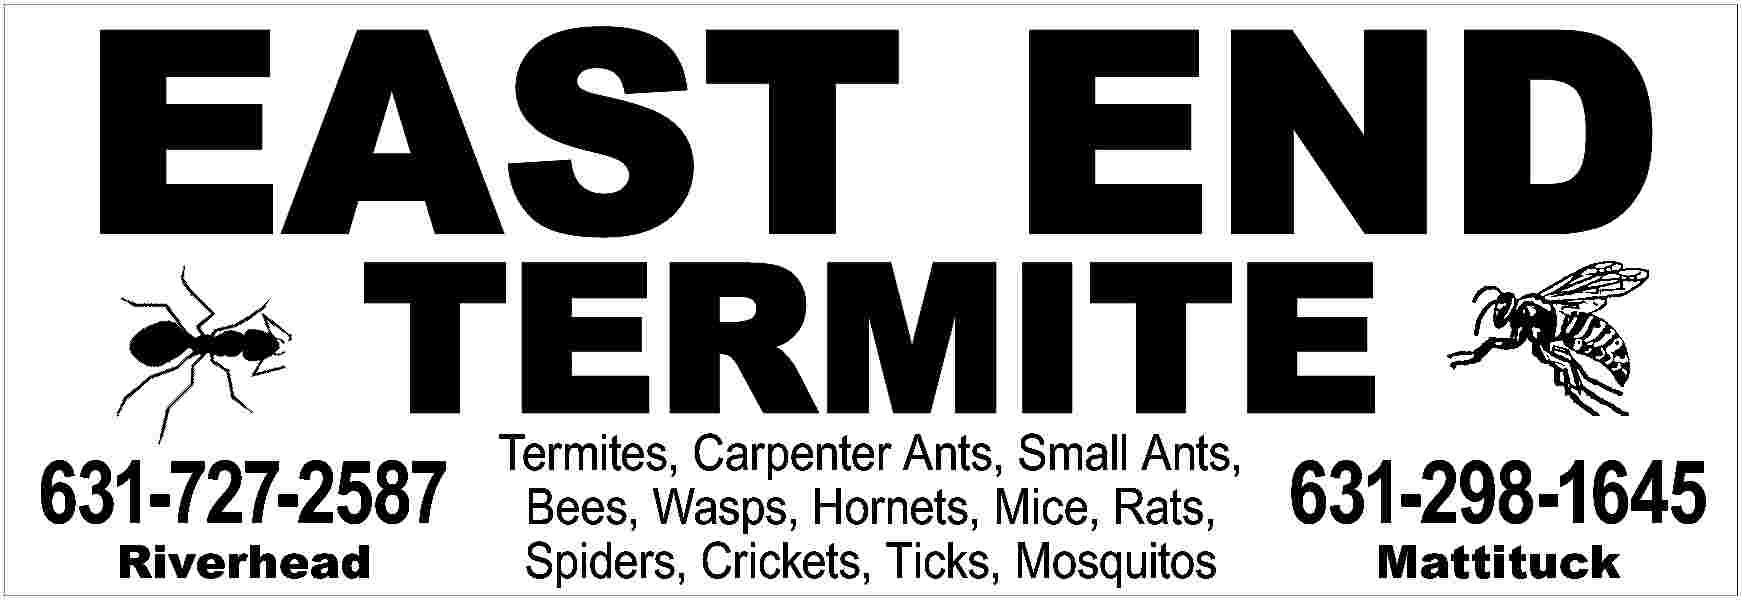 EAST END <br>TERMITE <br> <br>631-727-2587  EAST END  TERMITE    631-727-2587  Riverhead    Termites, Carpenter Ants, Small Ants,  Bees, Wasps, Hornets, Mice, Rats,  Spiders, Crickets, Ticks, Mosquitos    631-298-1645  Mattituck     